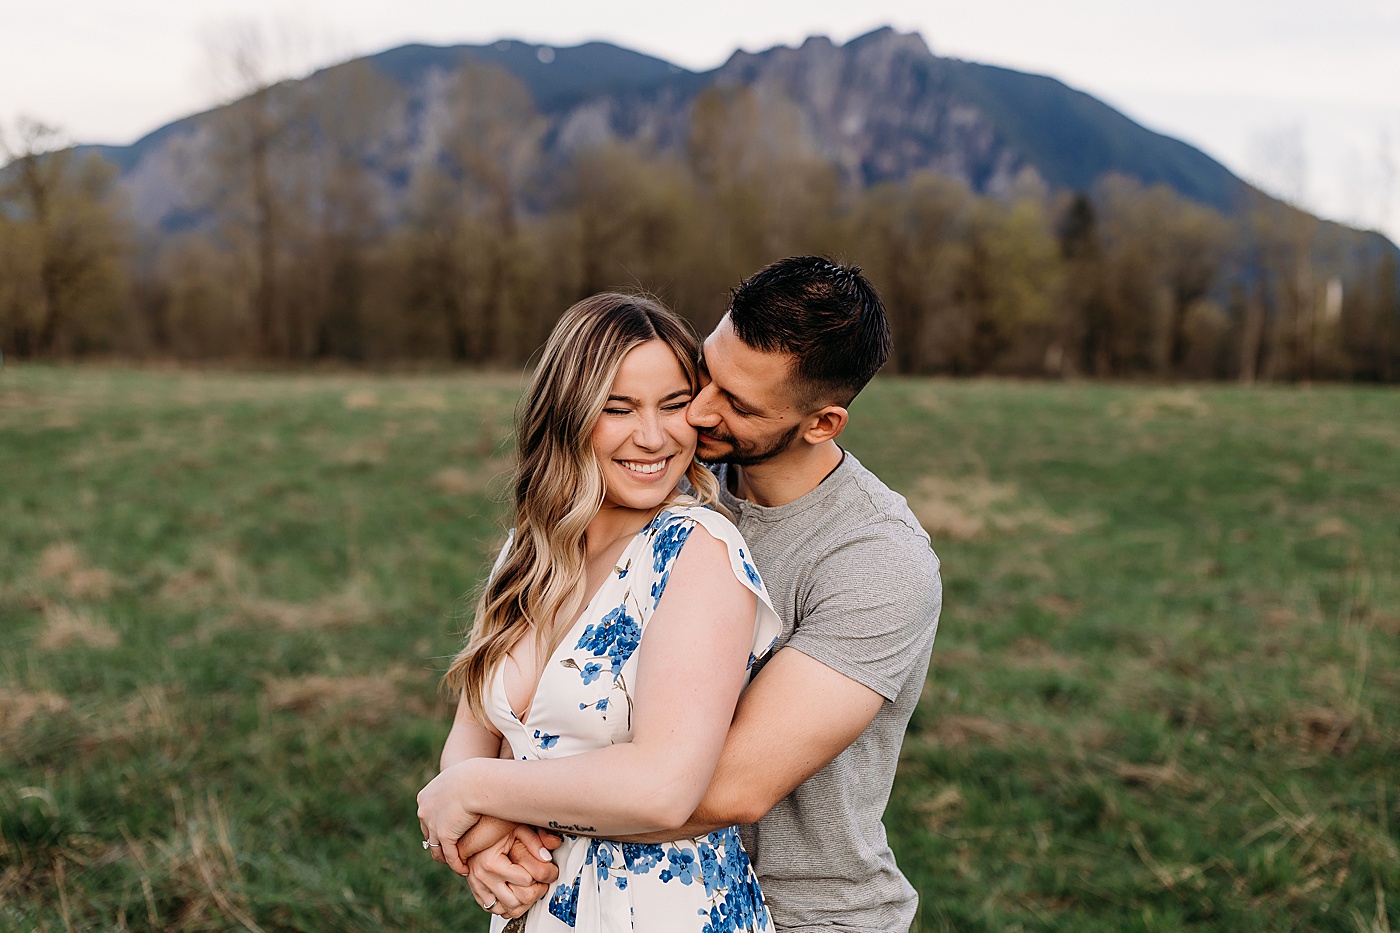 Couple hugging and laughing during engagement photoshoot | Photo by Megan Montalvo Photography